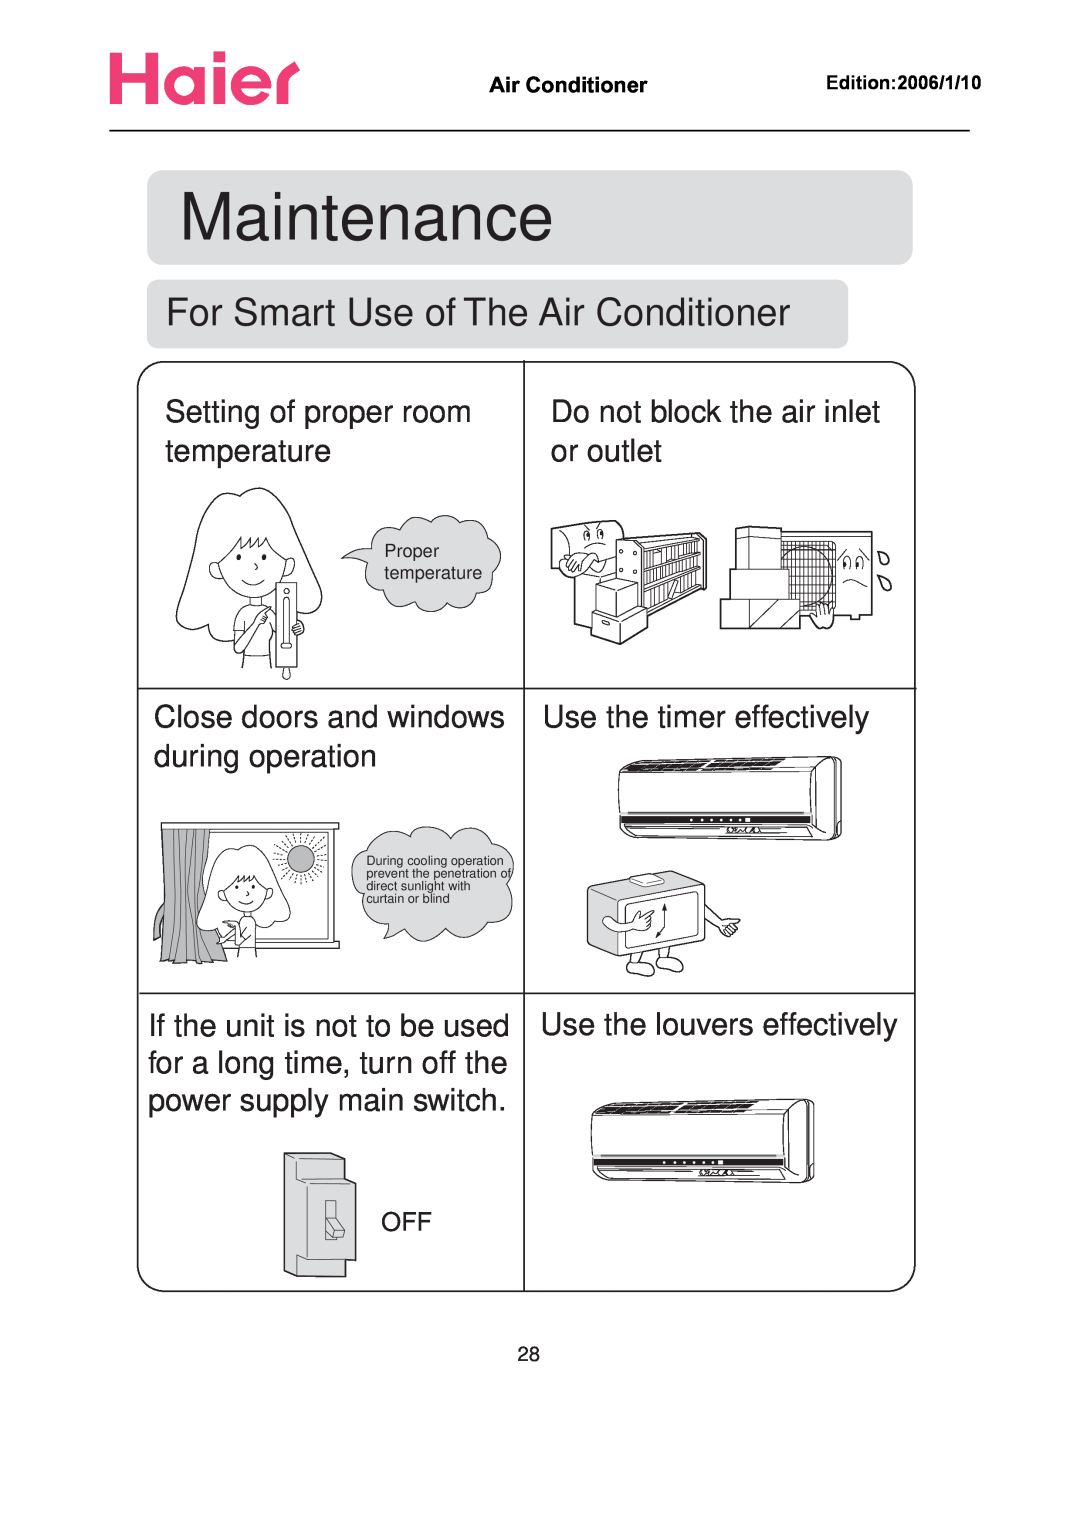 Haier Compact Air Conditioner manual Maintenance, For Smart Use of The Air Conditioner 